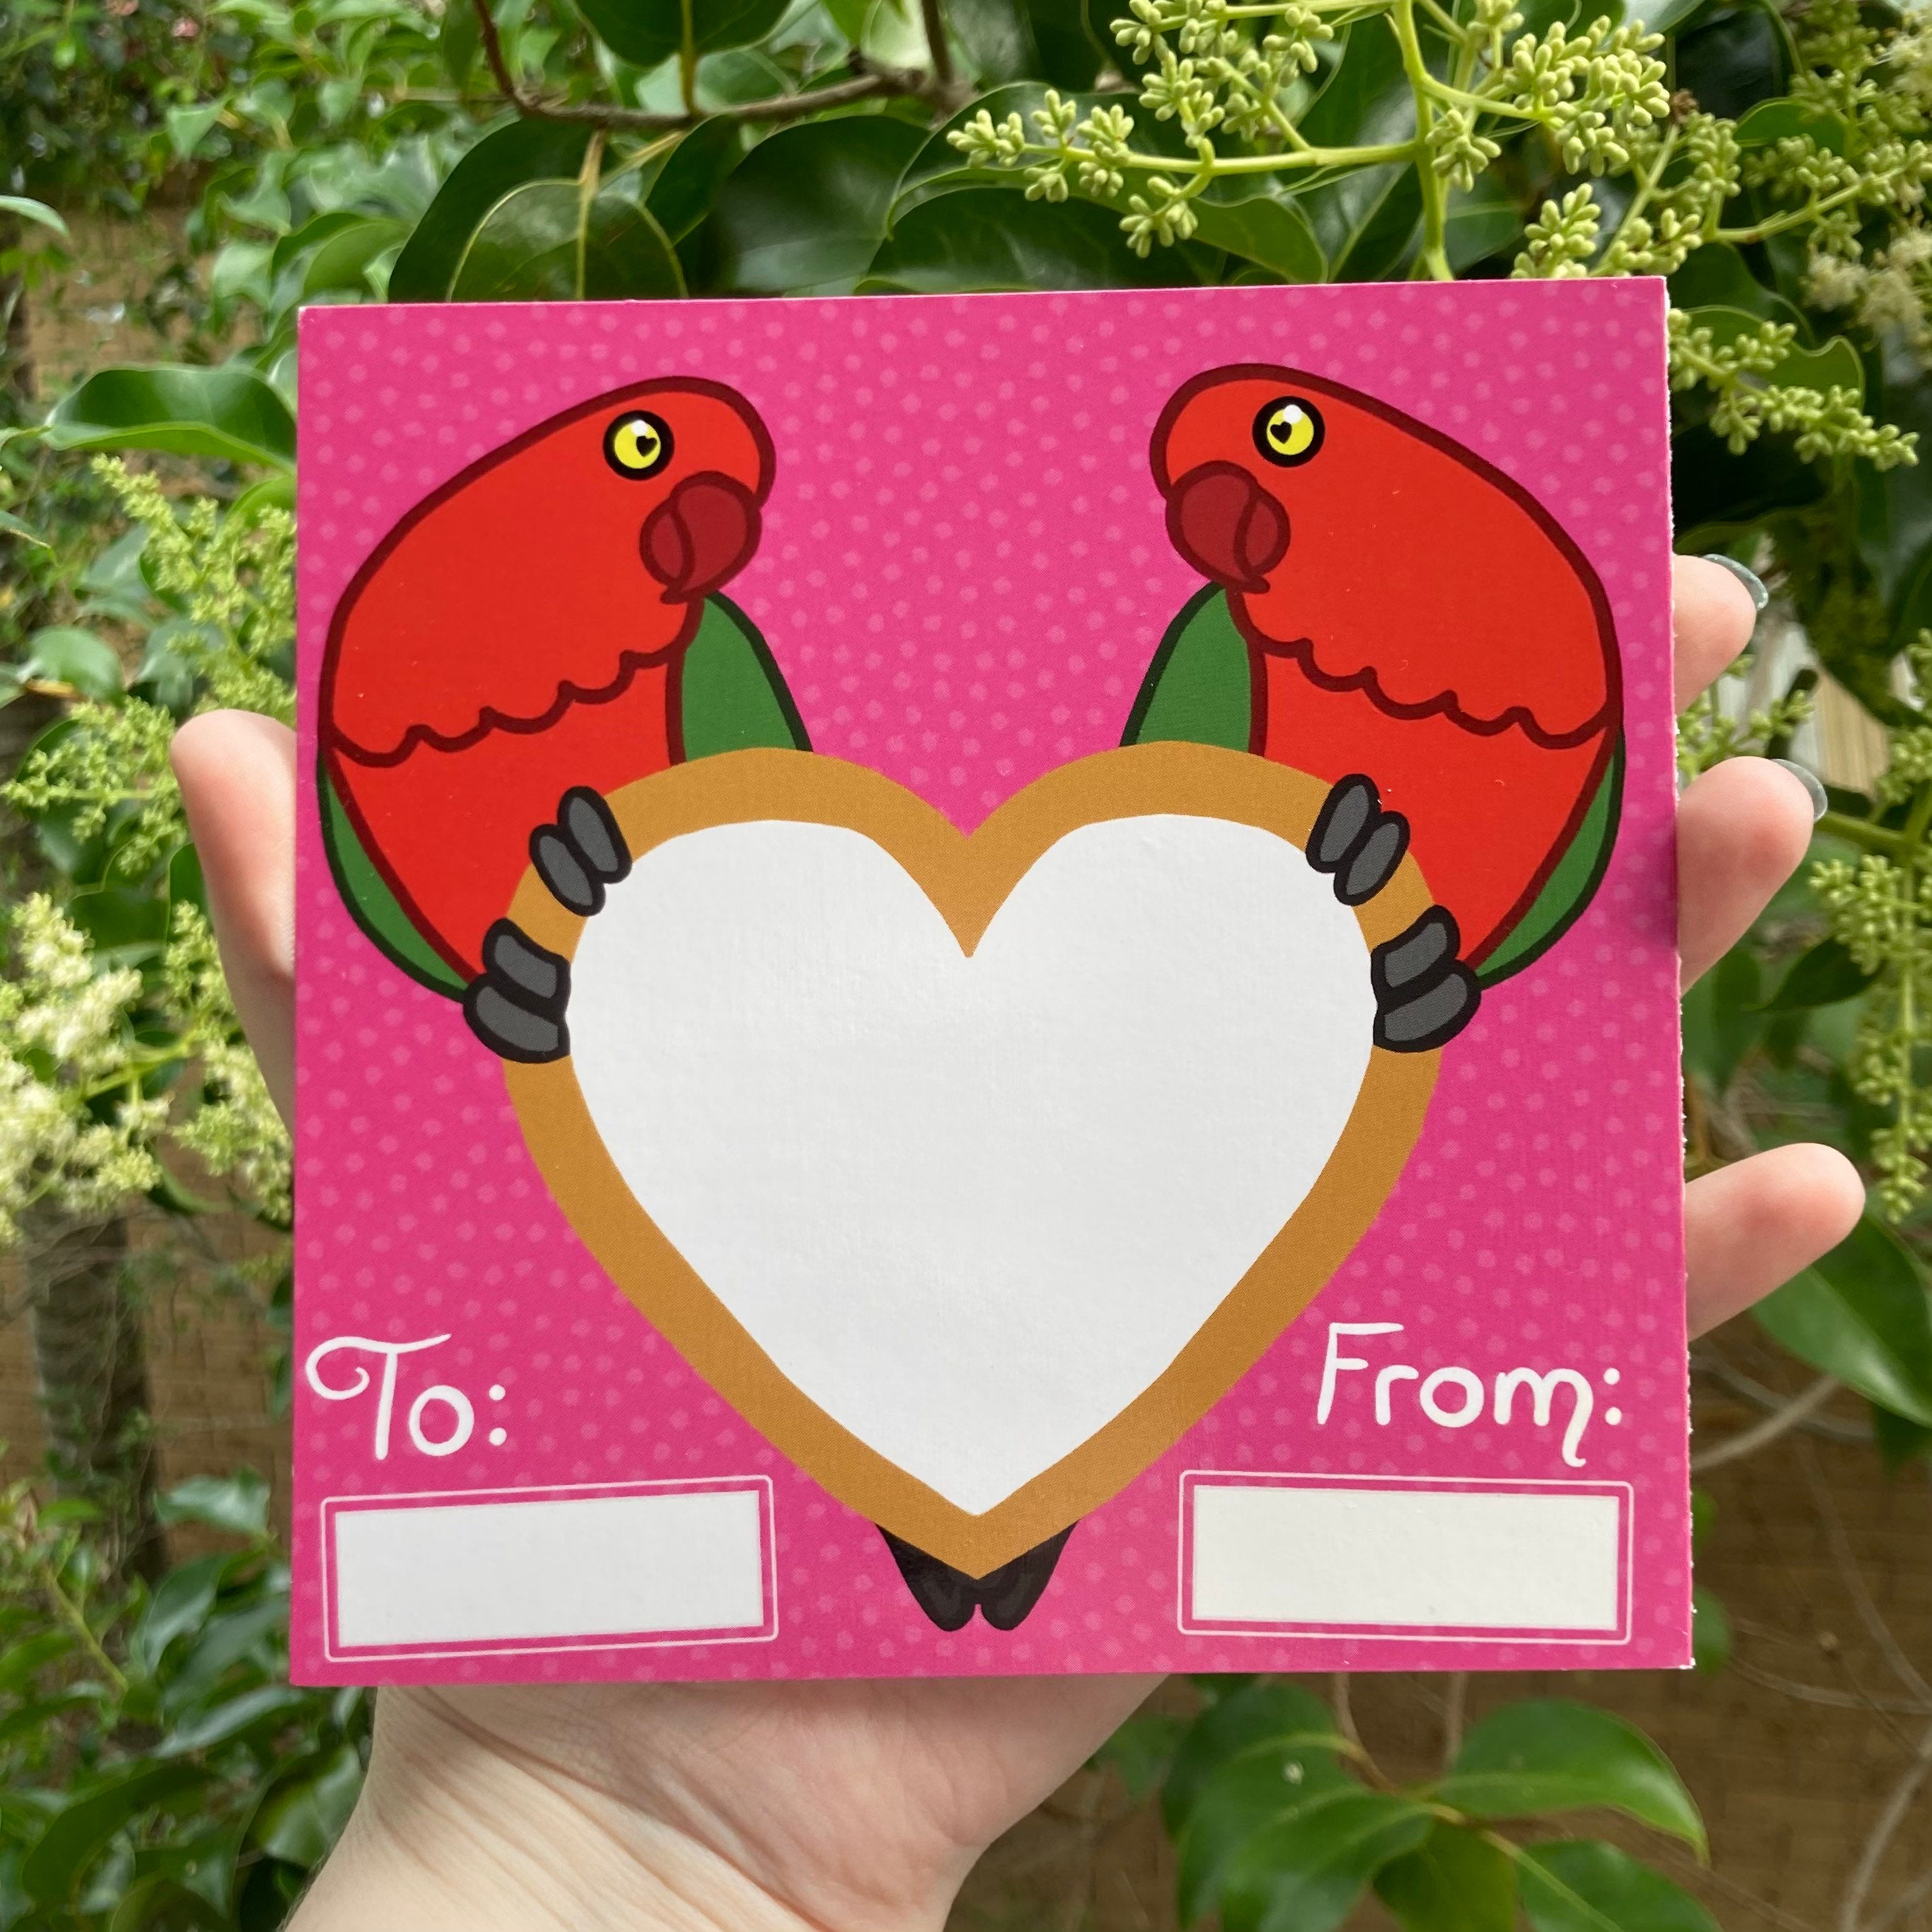 King Parrots Valentine’s Day card - Secret Scratch-off Heart Shaped Sticker! LGBT Gay Lesbian Options Available, Envelope Included